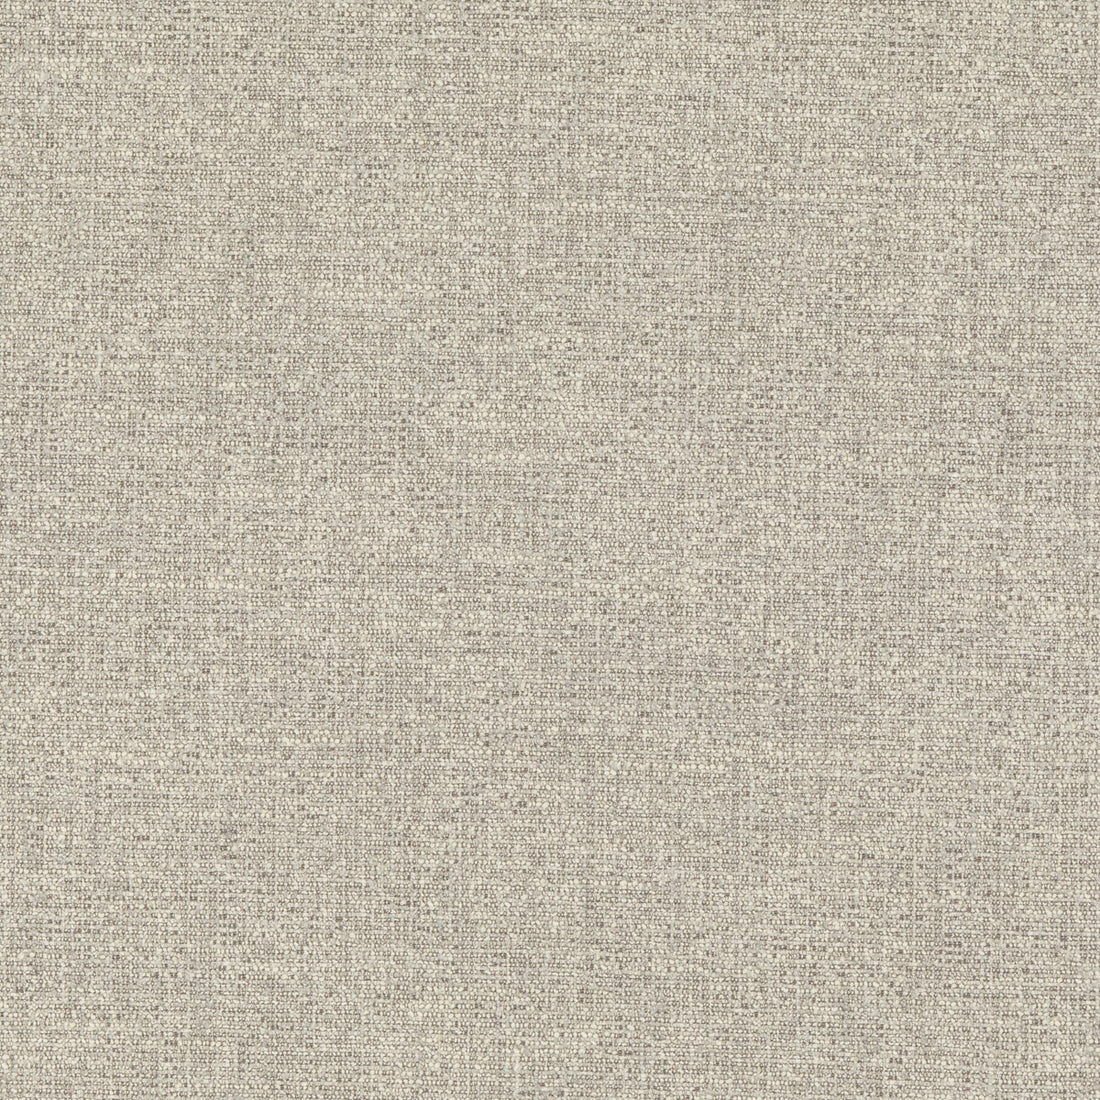 Loxley fabric in dove color - pattern BF10876.910.0 - by G P &amp; J Baker in the Essential Colours II collection